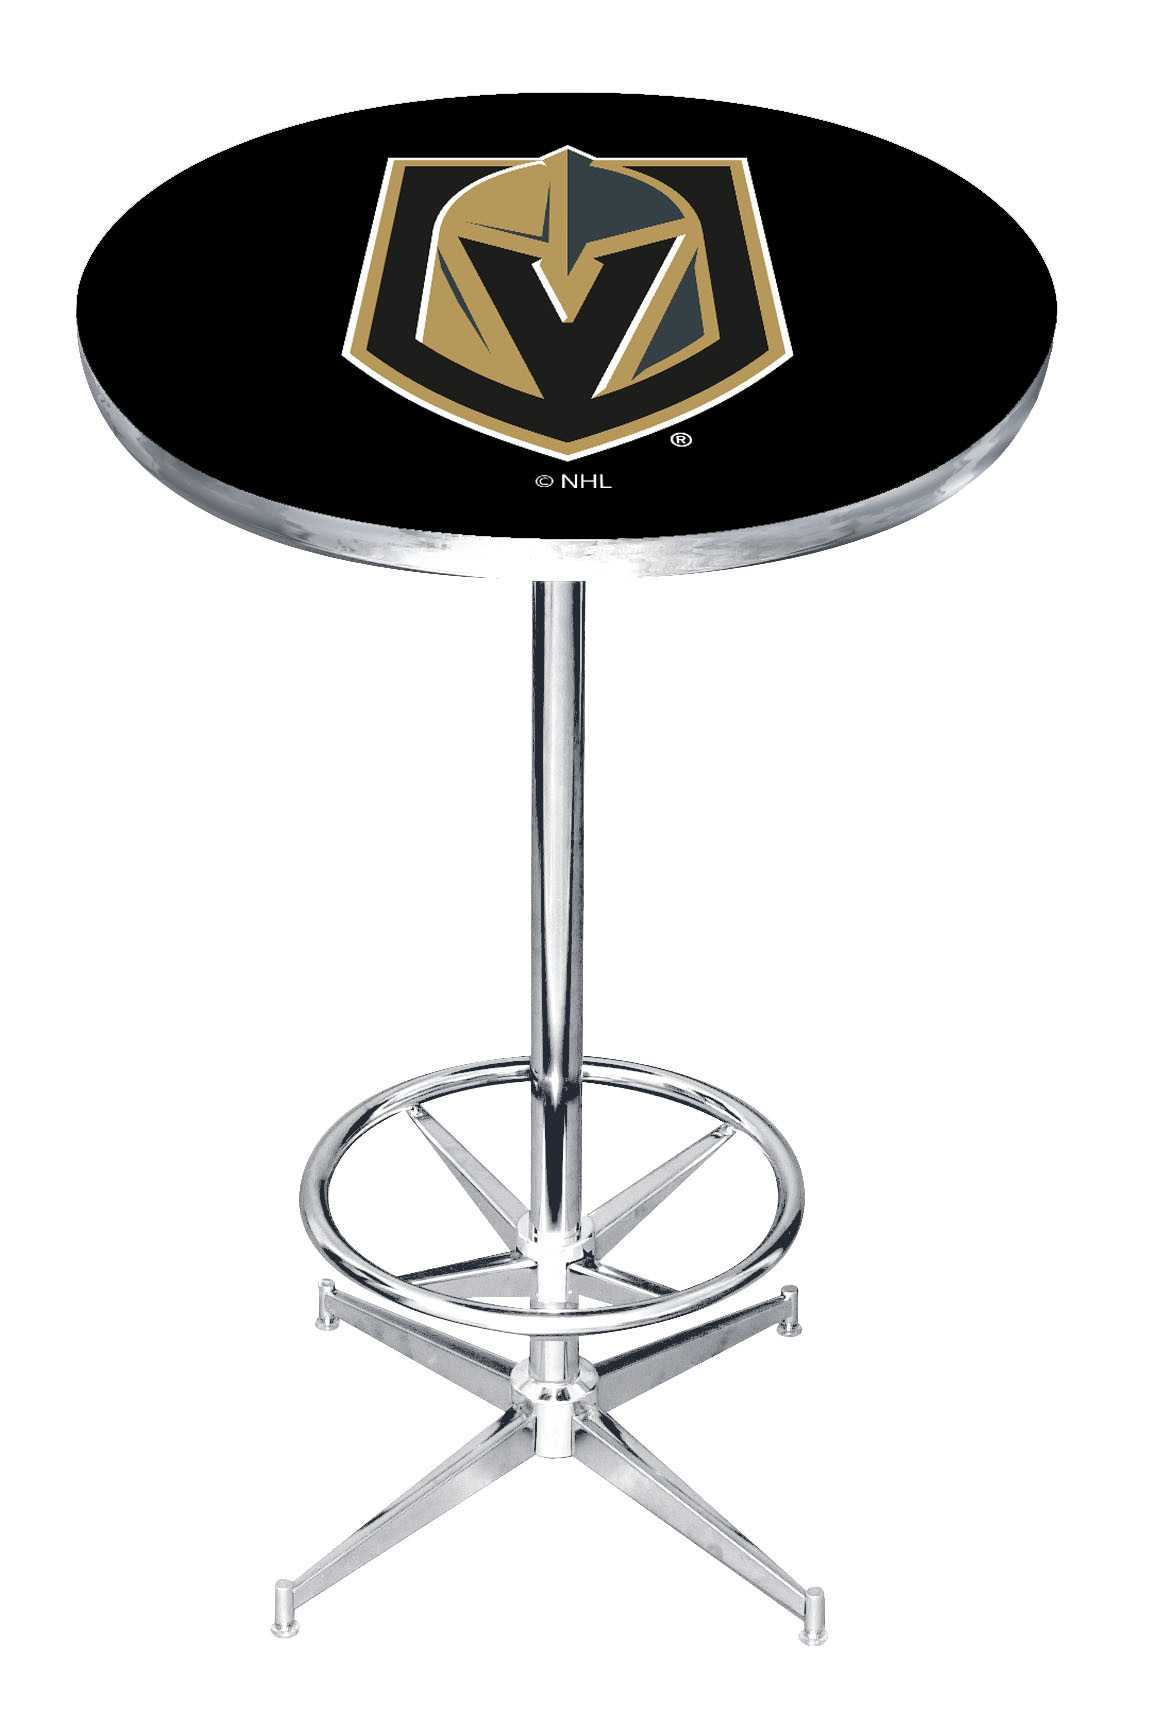 GOLDEN KNIGHTS PUB TABLE